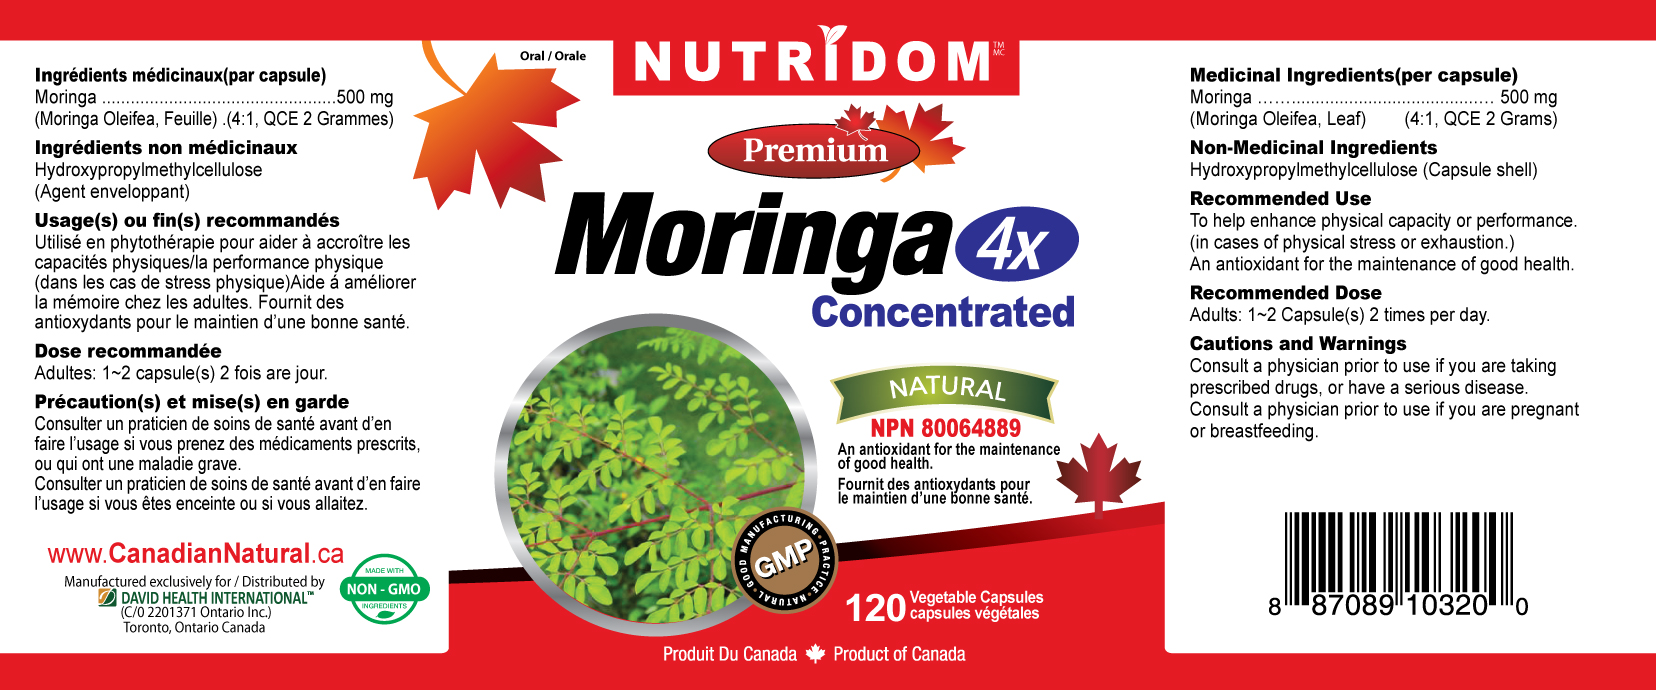 NUTRIDOM MORINGA CAPSULE 4X CONCENTRATED